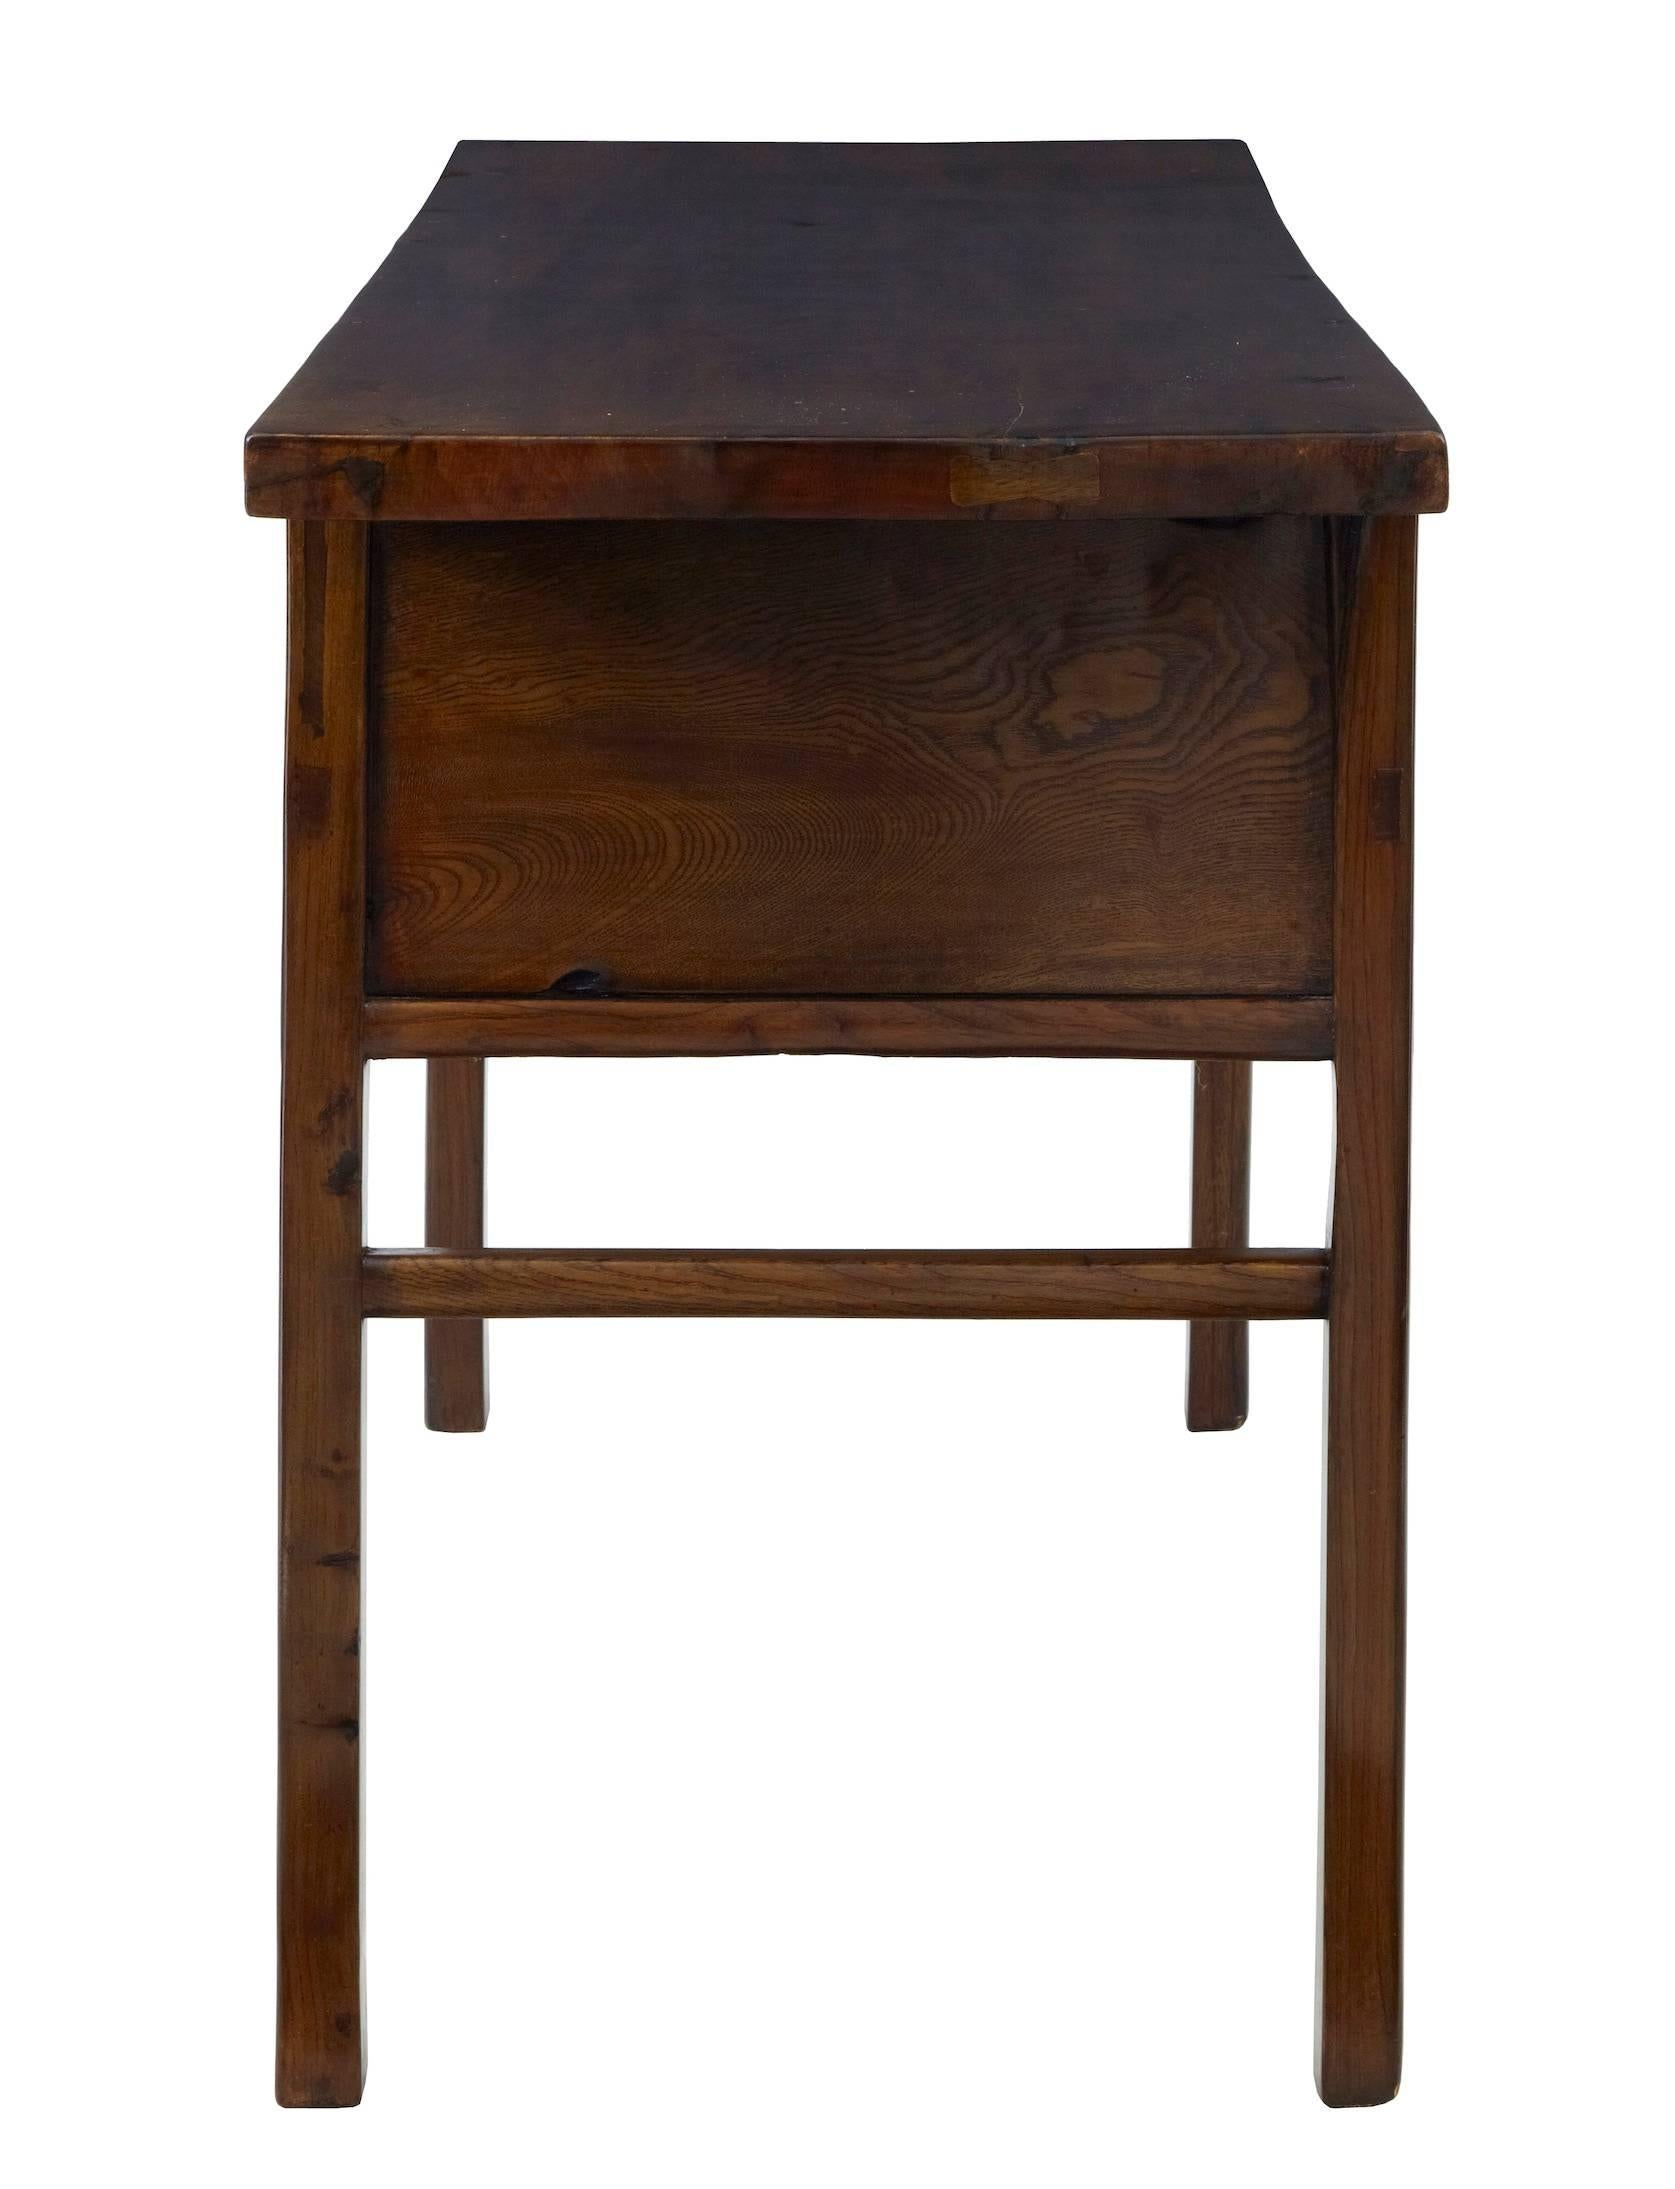 19th Century Chinese Lacquered Sideboard Table (Holzarbeit)